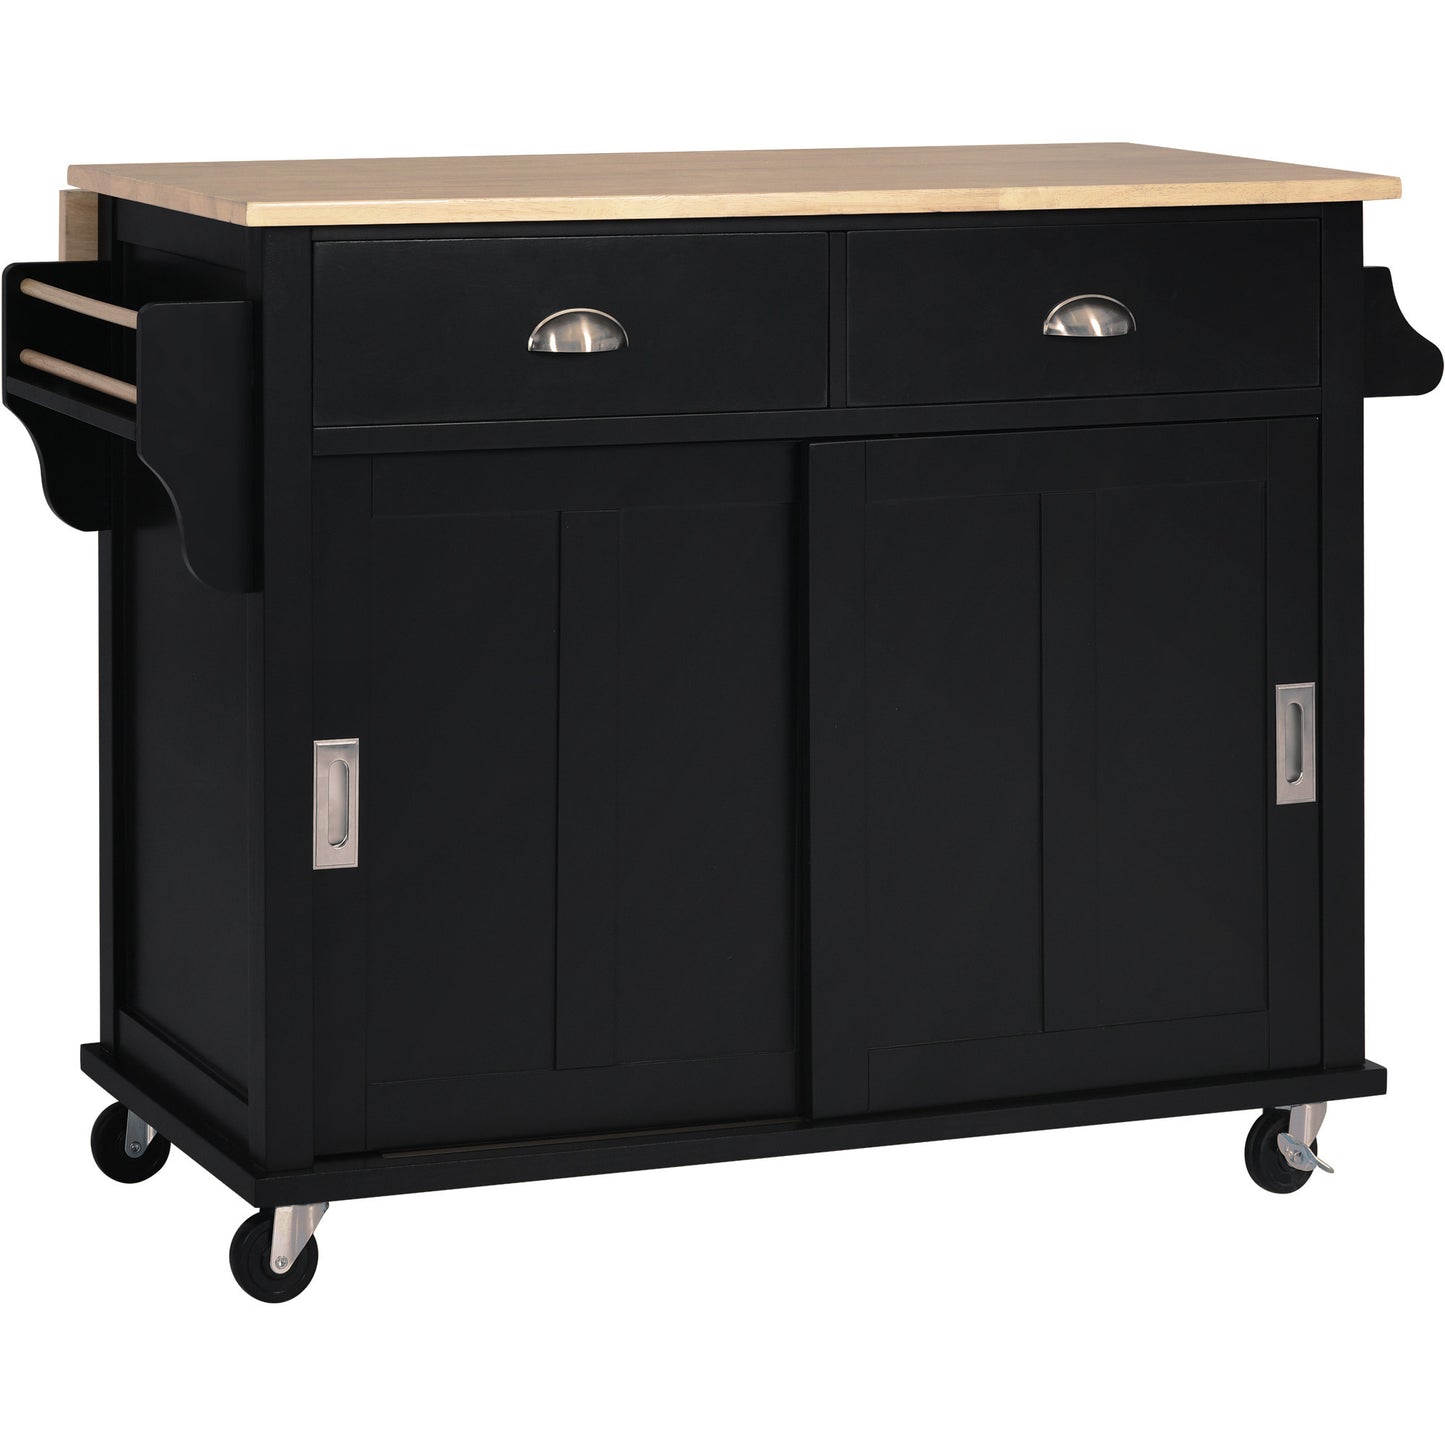 Kitchen Cart with Rubber wood Drop-Leaf Countertop, Concealed sliding barn door adjustable height,Kitchen Island on 4 Wheels with Storage Cabinet and 2 Drawers,L52.2xW30.5xH36.6 inch, Black